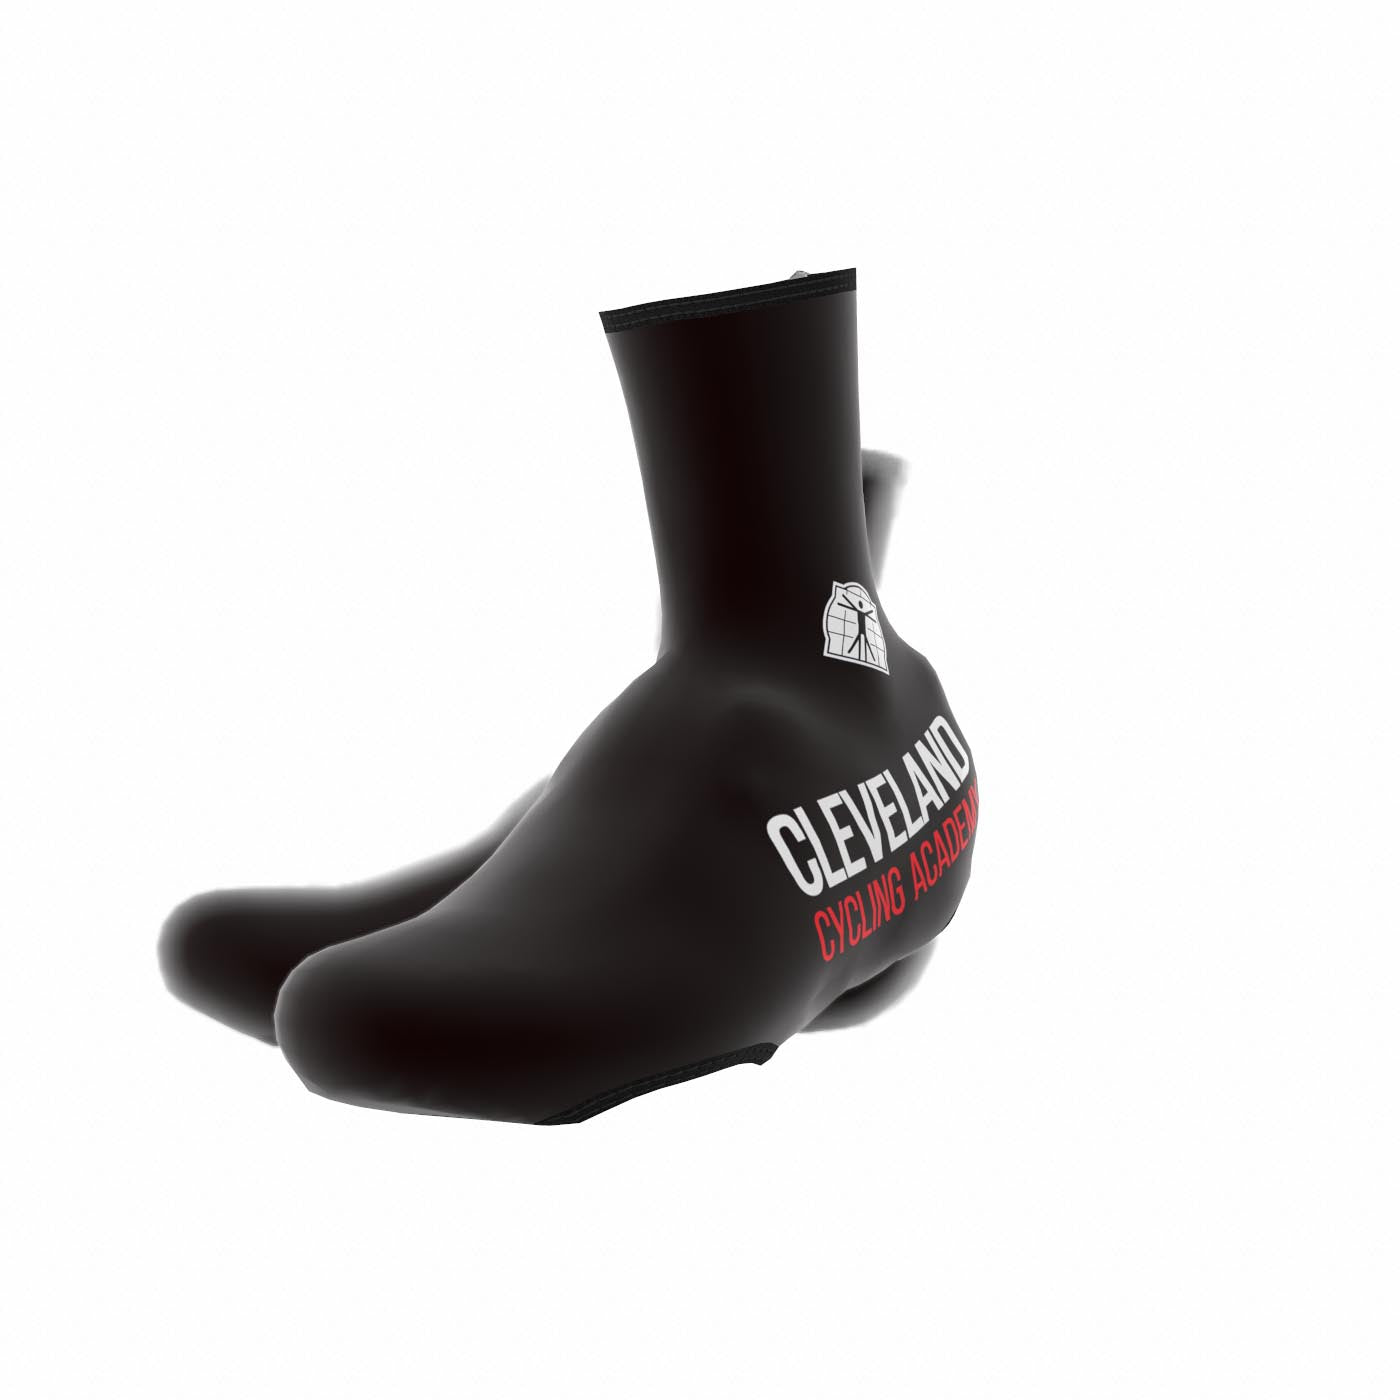 Tempest Full Protect Winter Shoe Covers - Unisex